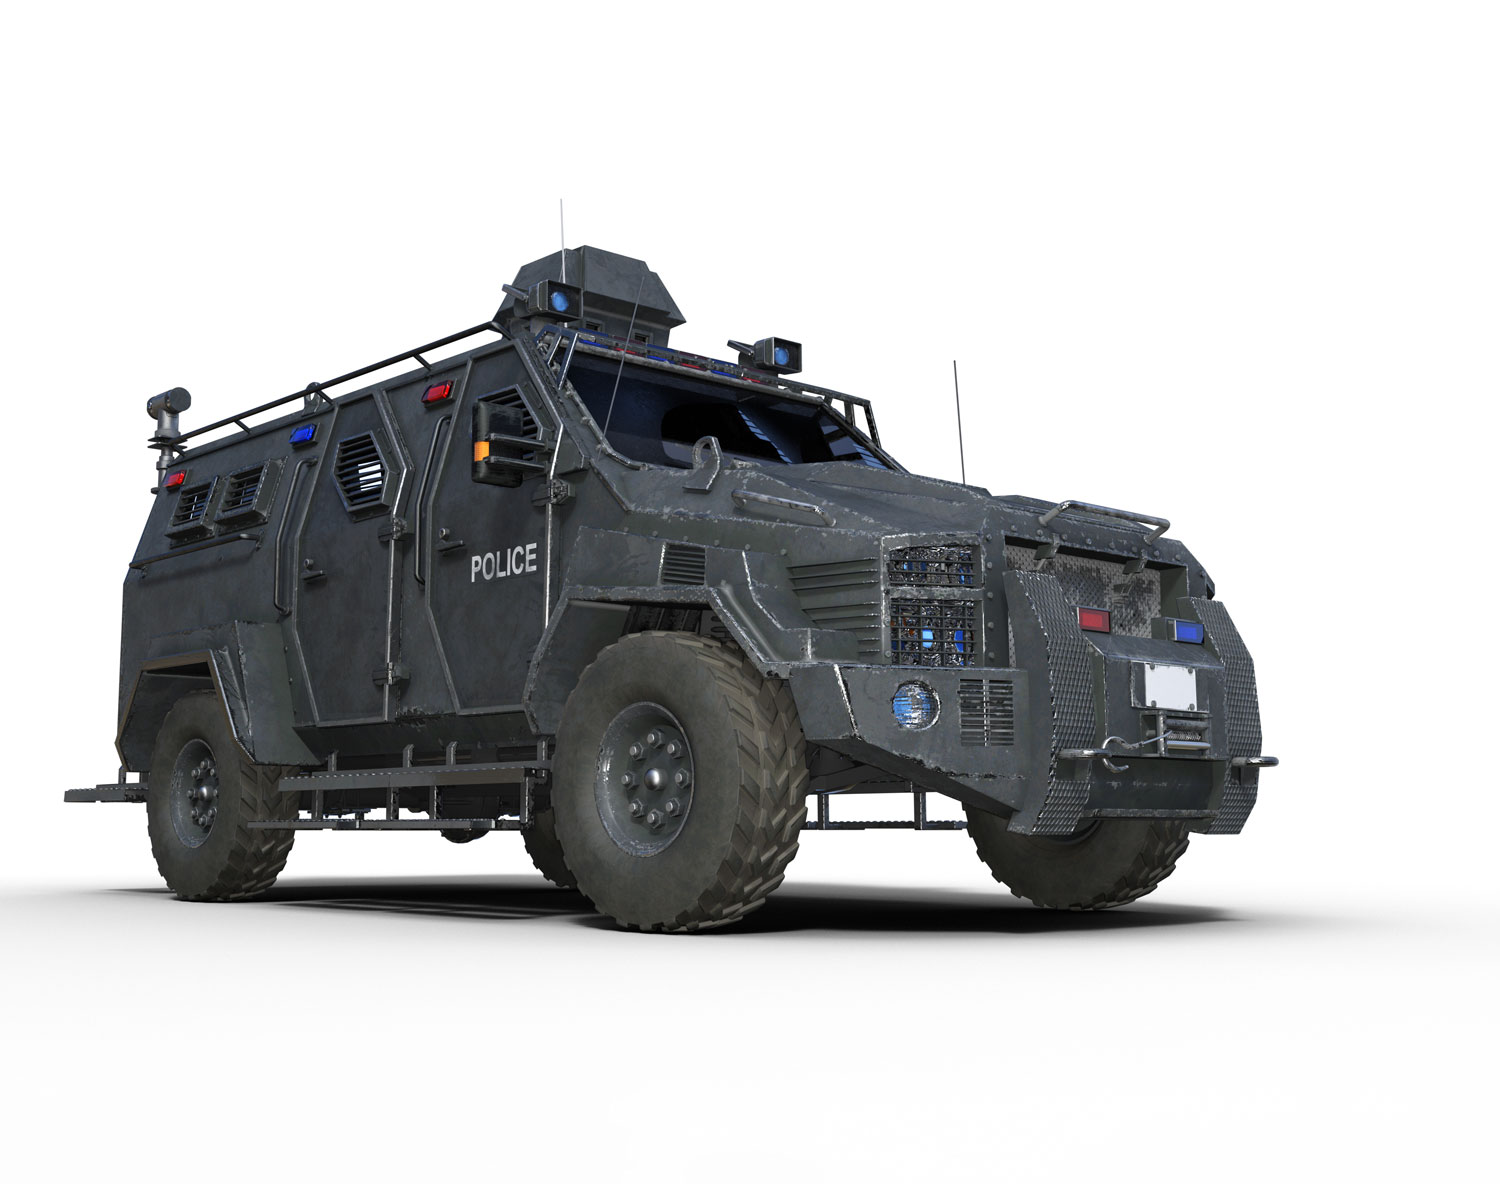 commercial armor on a police vehicle